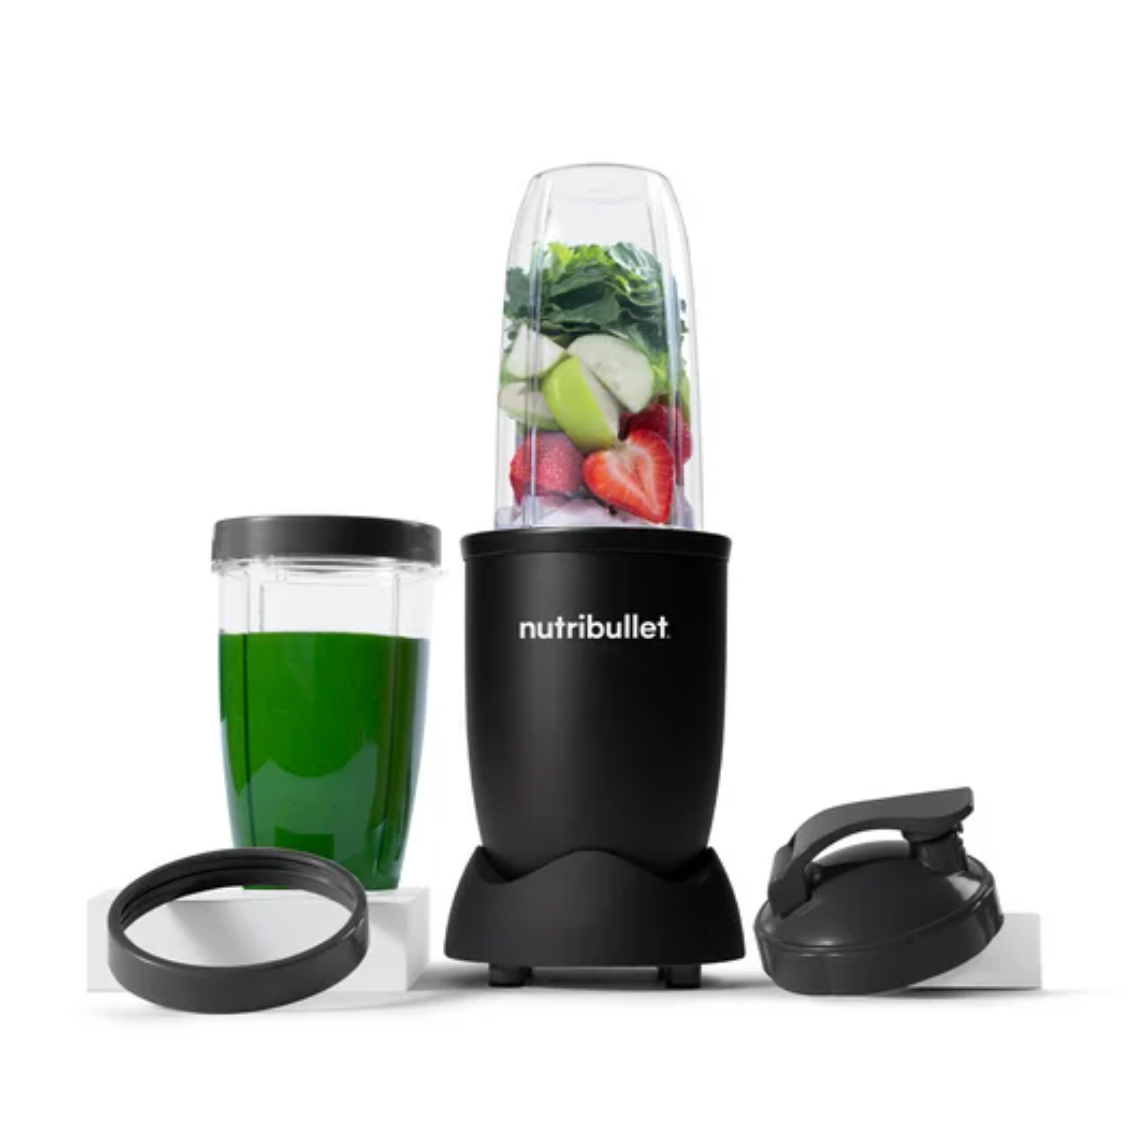 4 Best Portable Blenders to Have your Smoothie Anywhere – YouBeauty